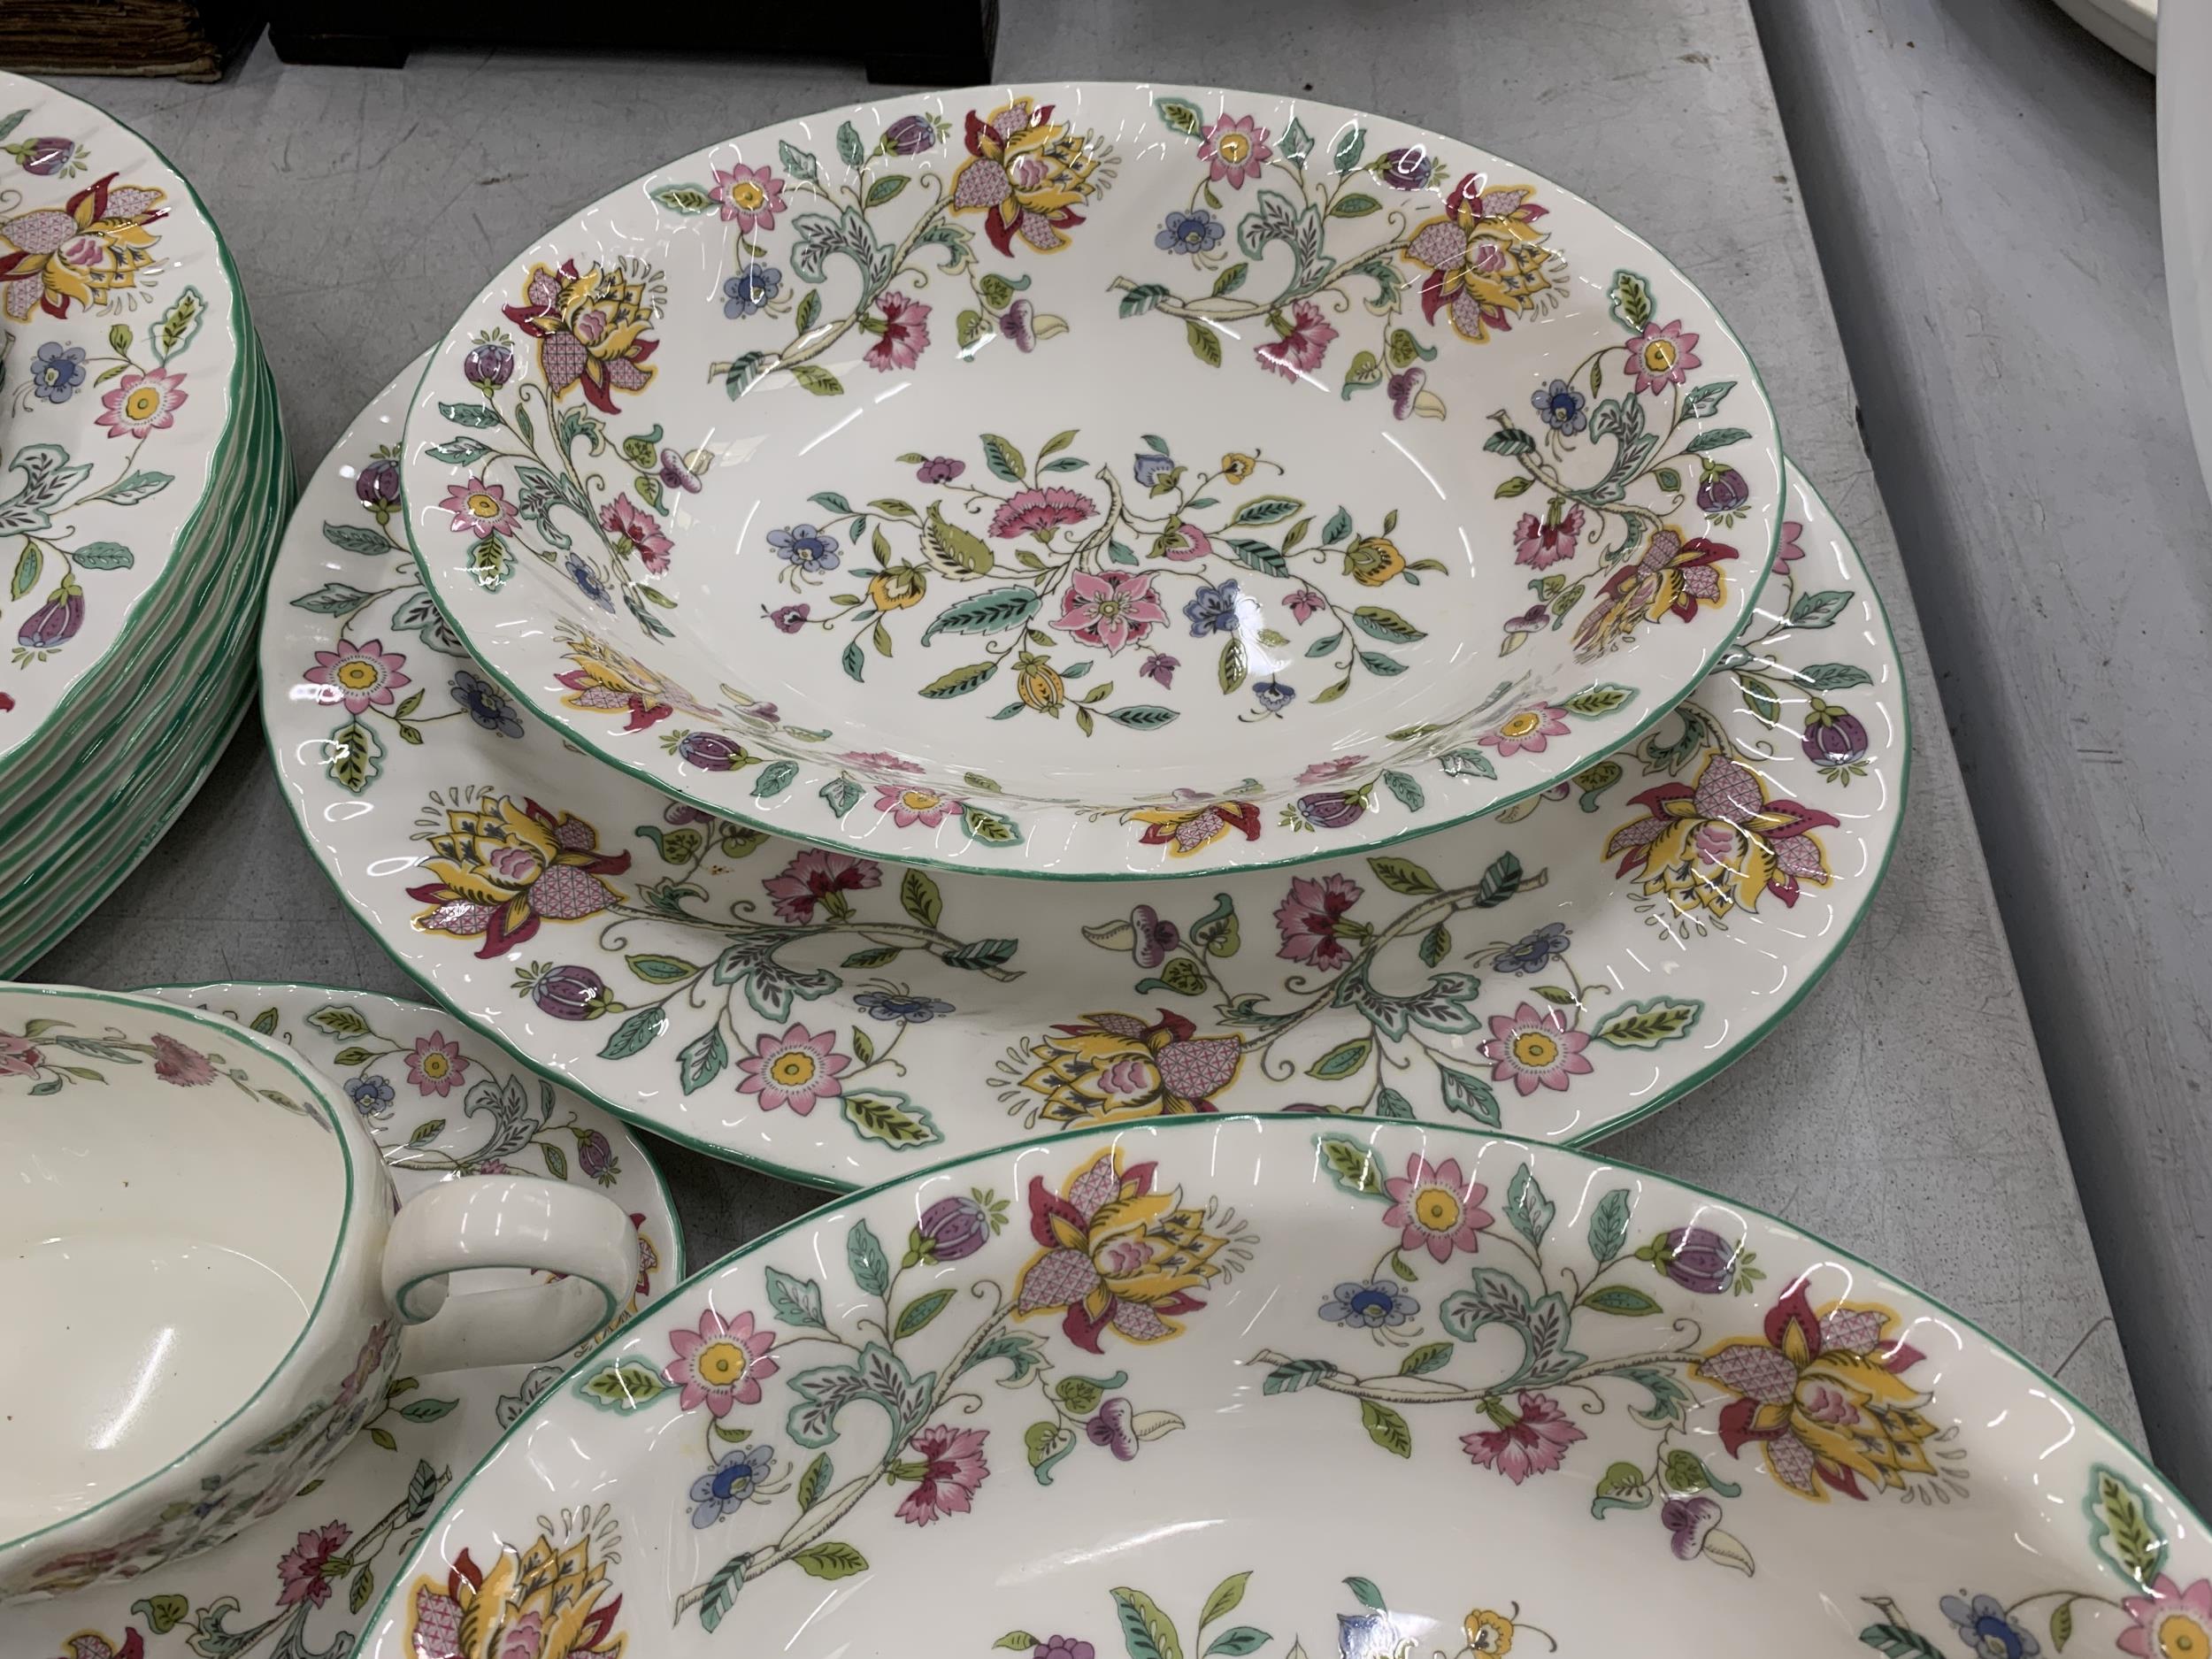 A LARGE QUANTITY OF MINTON HADDON HALL TO INCLUDE SERVING BOWLS, PLATTER, DINNER PLATES, SOUP BOWLS, - Image 5 of 7